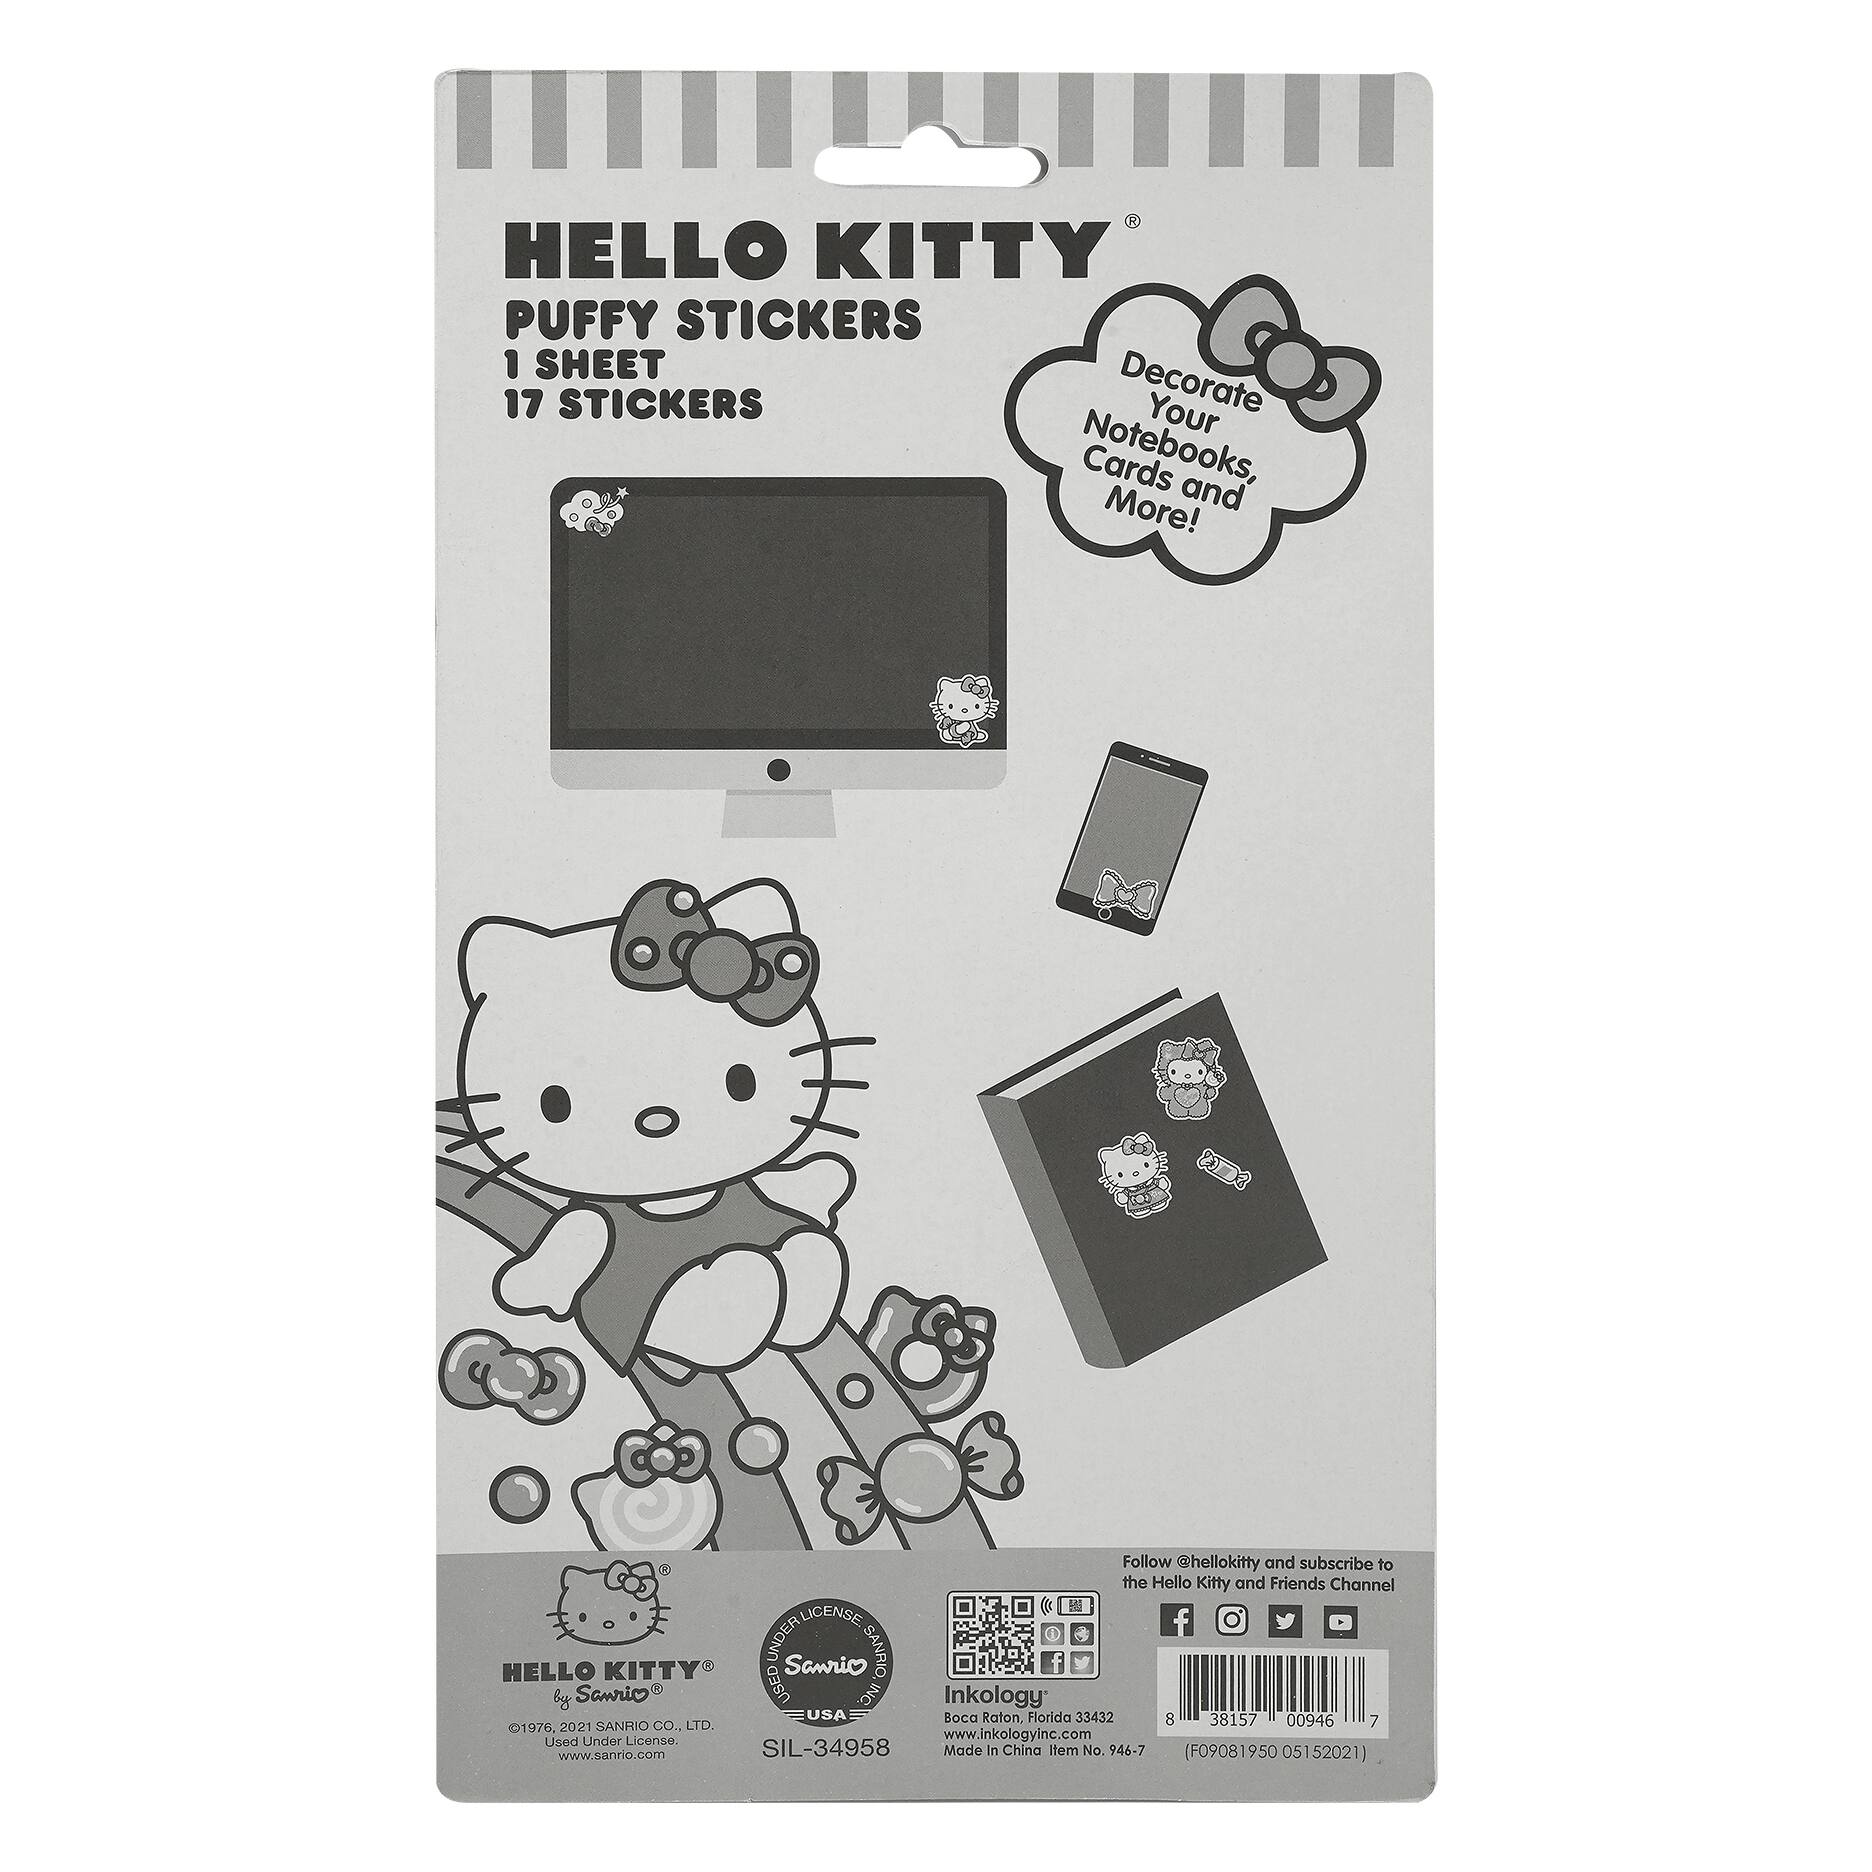 Assorted Hello Kitty® Puffy Stickers, 1pc.